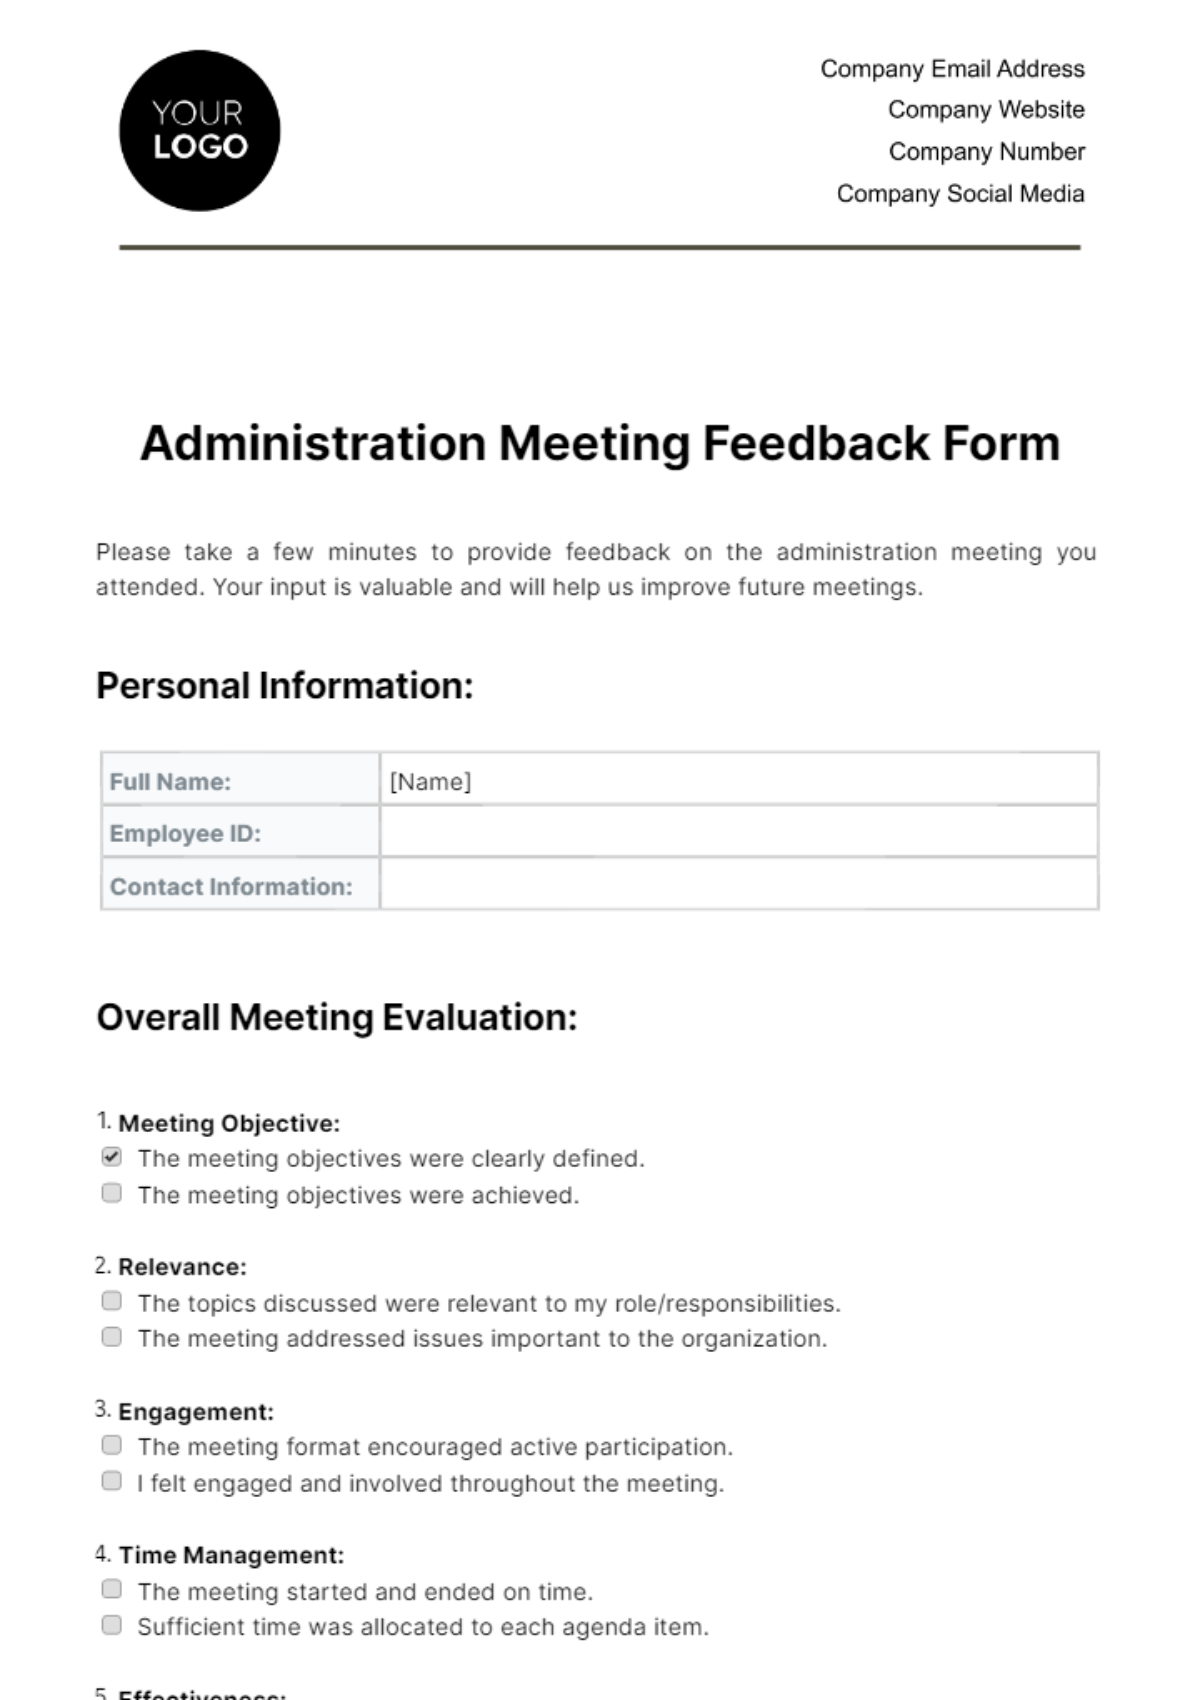 Administration Meeting Feedback Form Template